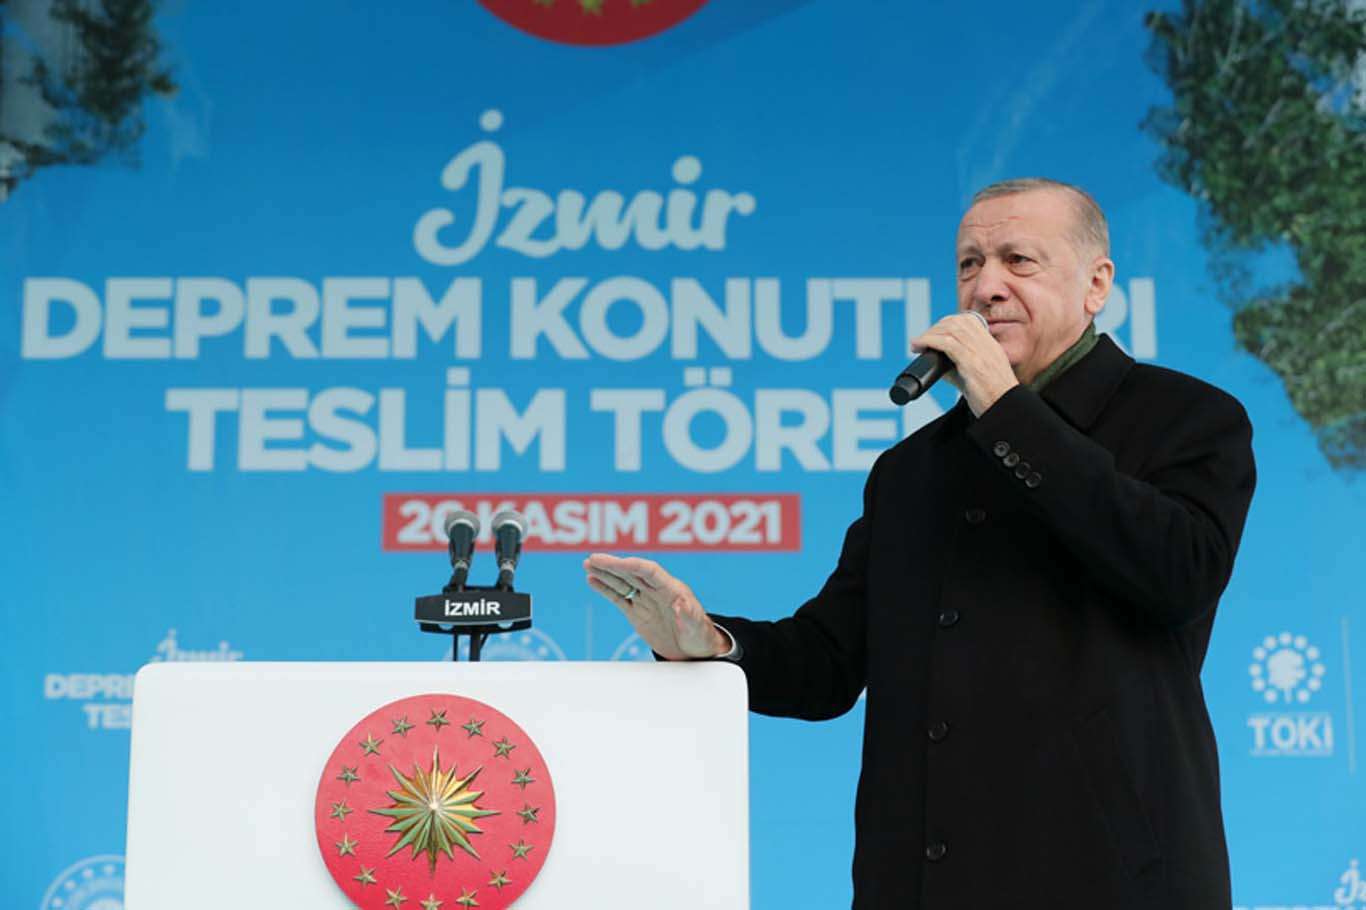 Erdoğan: Turkey is capable of initiating search and rescue within minutes after a disaster